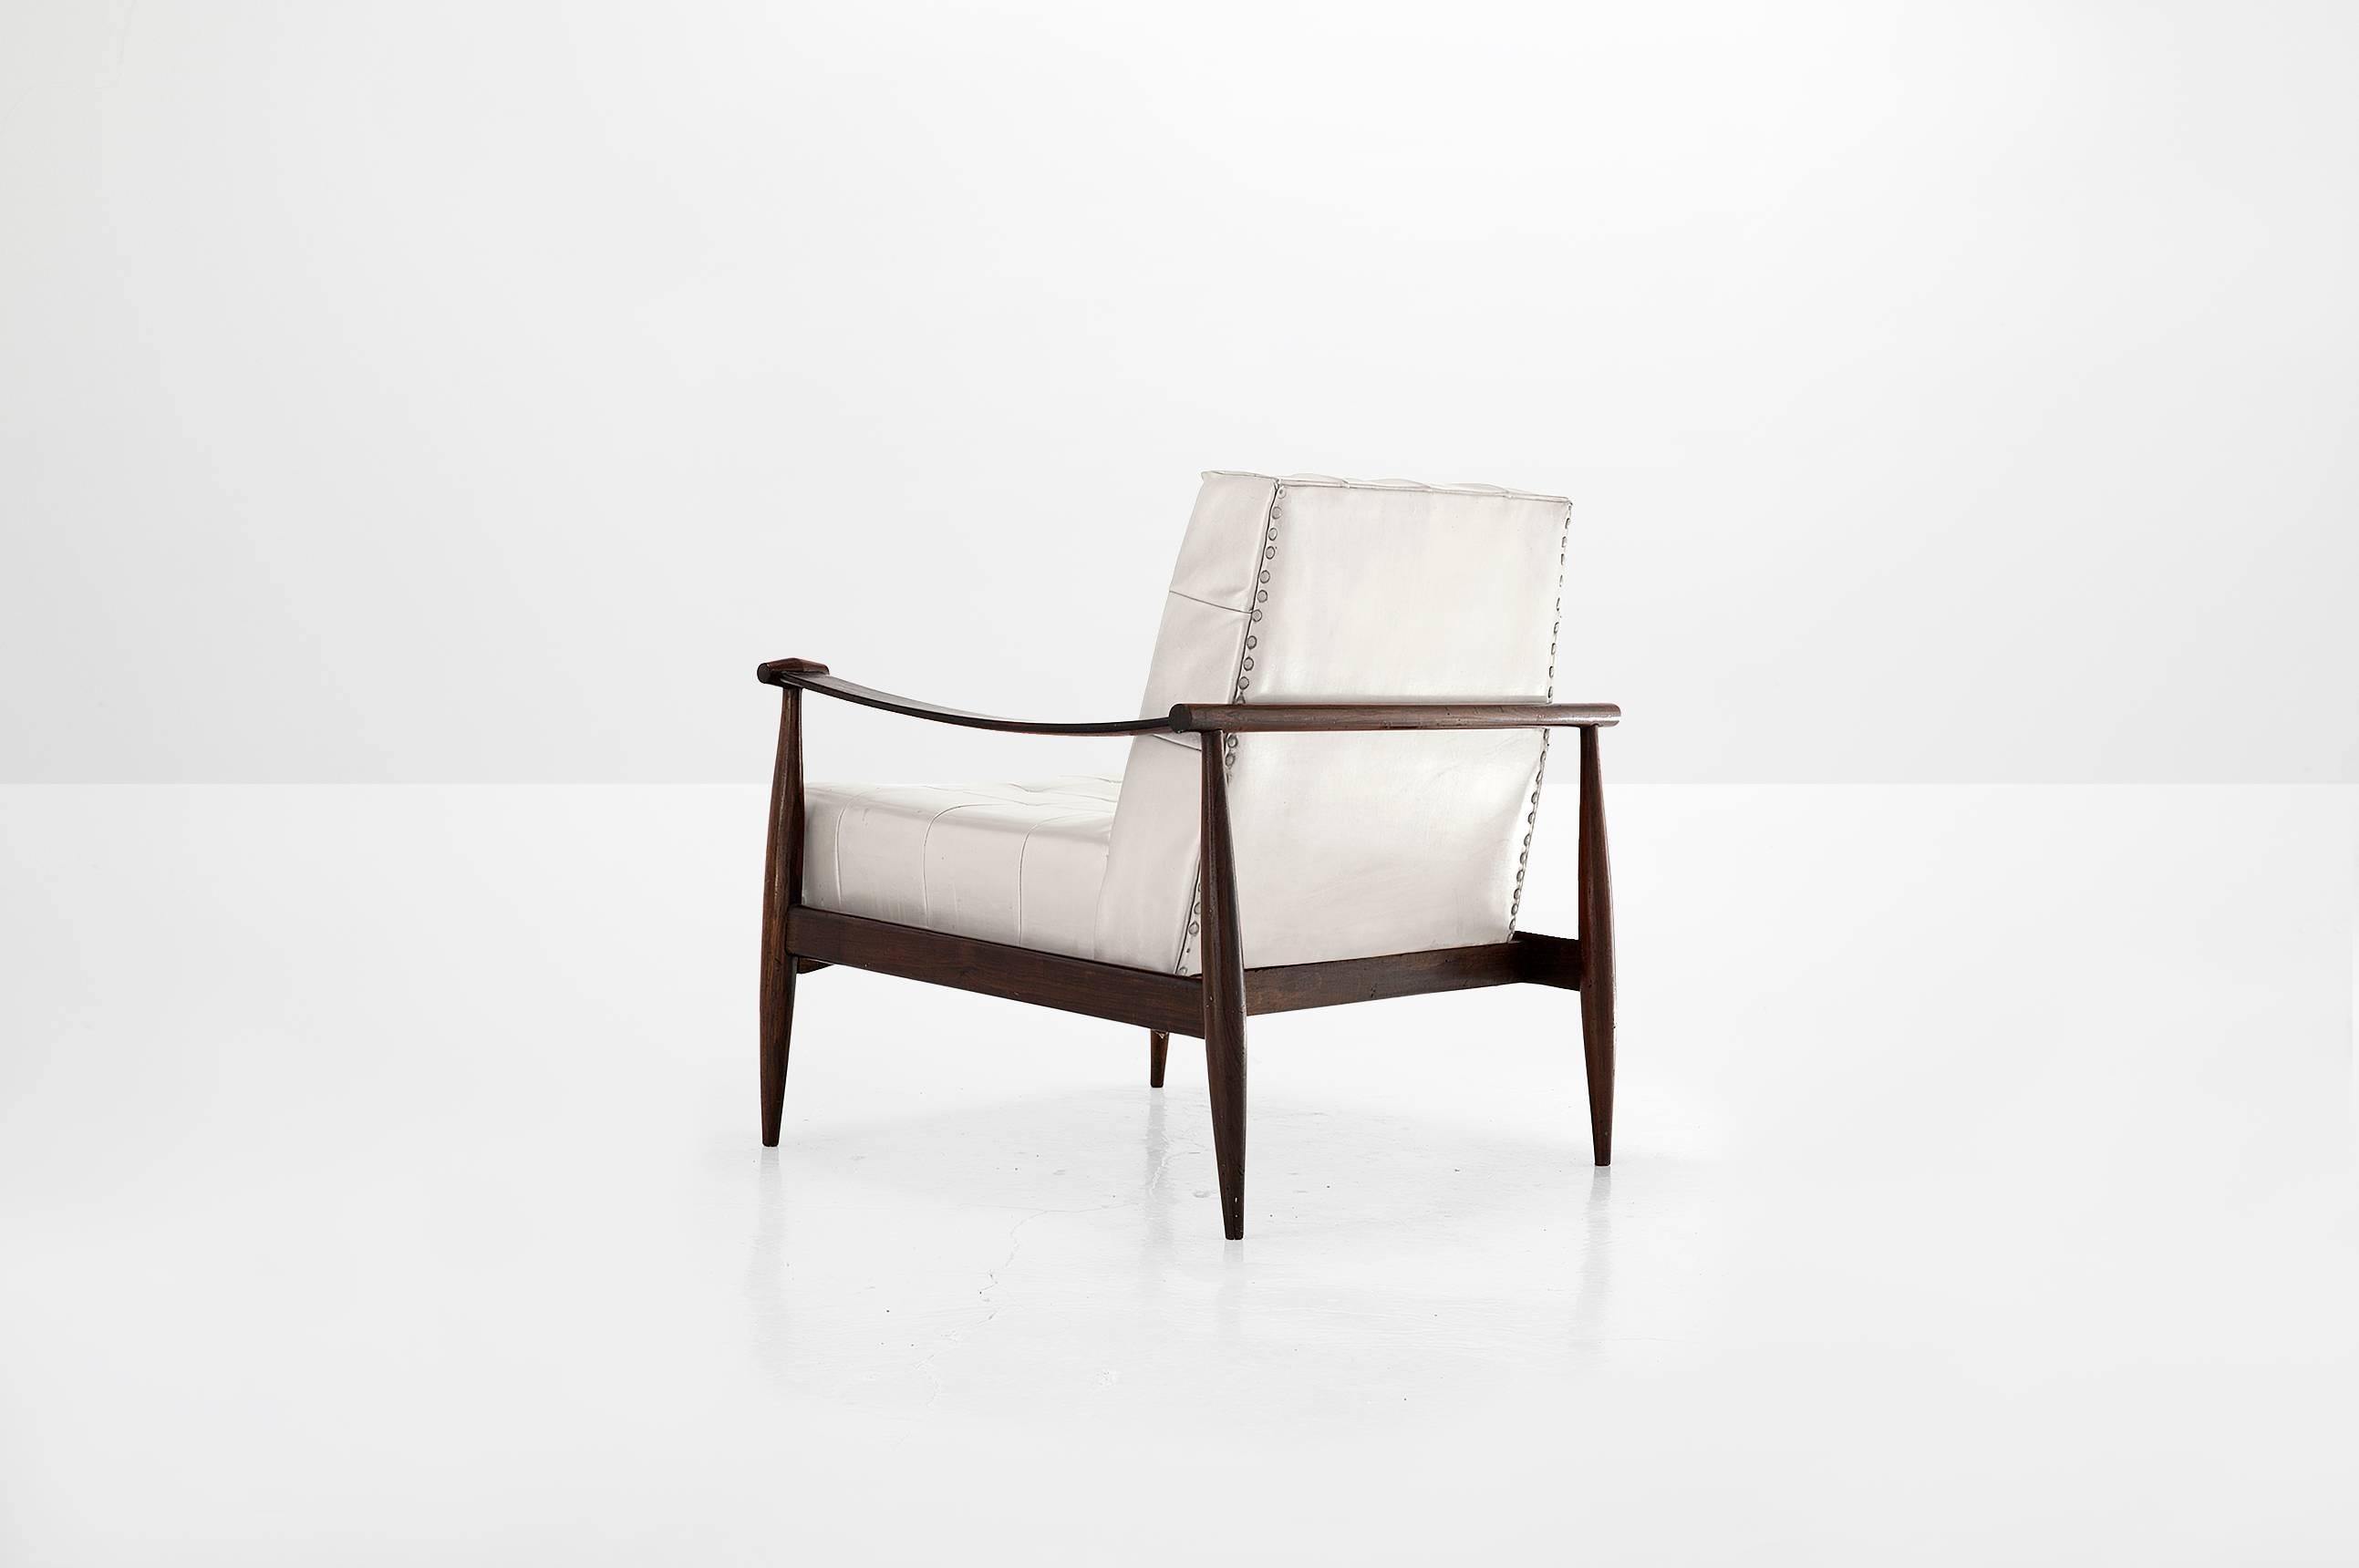 Liceu de artes e oficios

Pair of armchairs
Manufactured by Liceo de Arte e Oficios
Brazil, 1950
Solid jacaranda and upholstery
Cream upholstered Mid-Century Modern 

Measurements
77 cm x 85 cm x 69 H cm
30.2 in x 33.5 in x 27 H